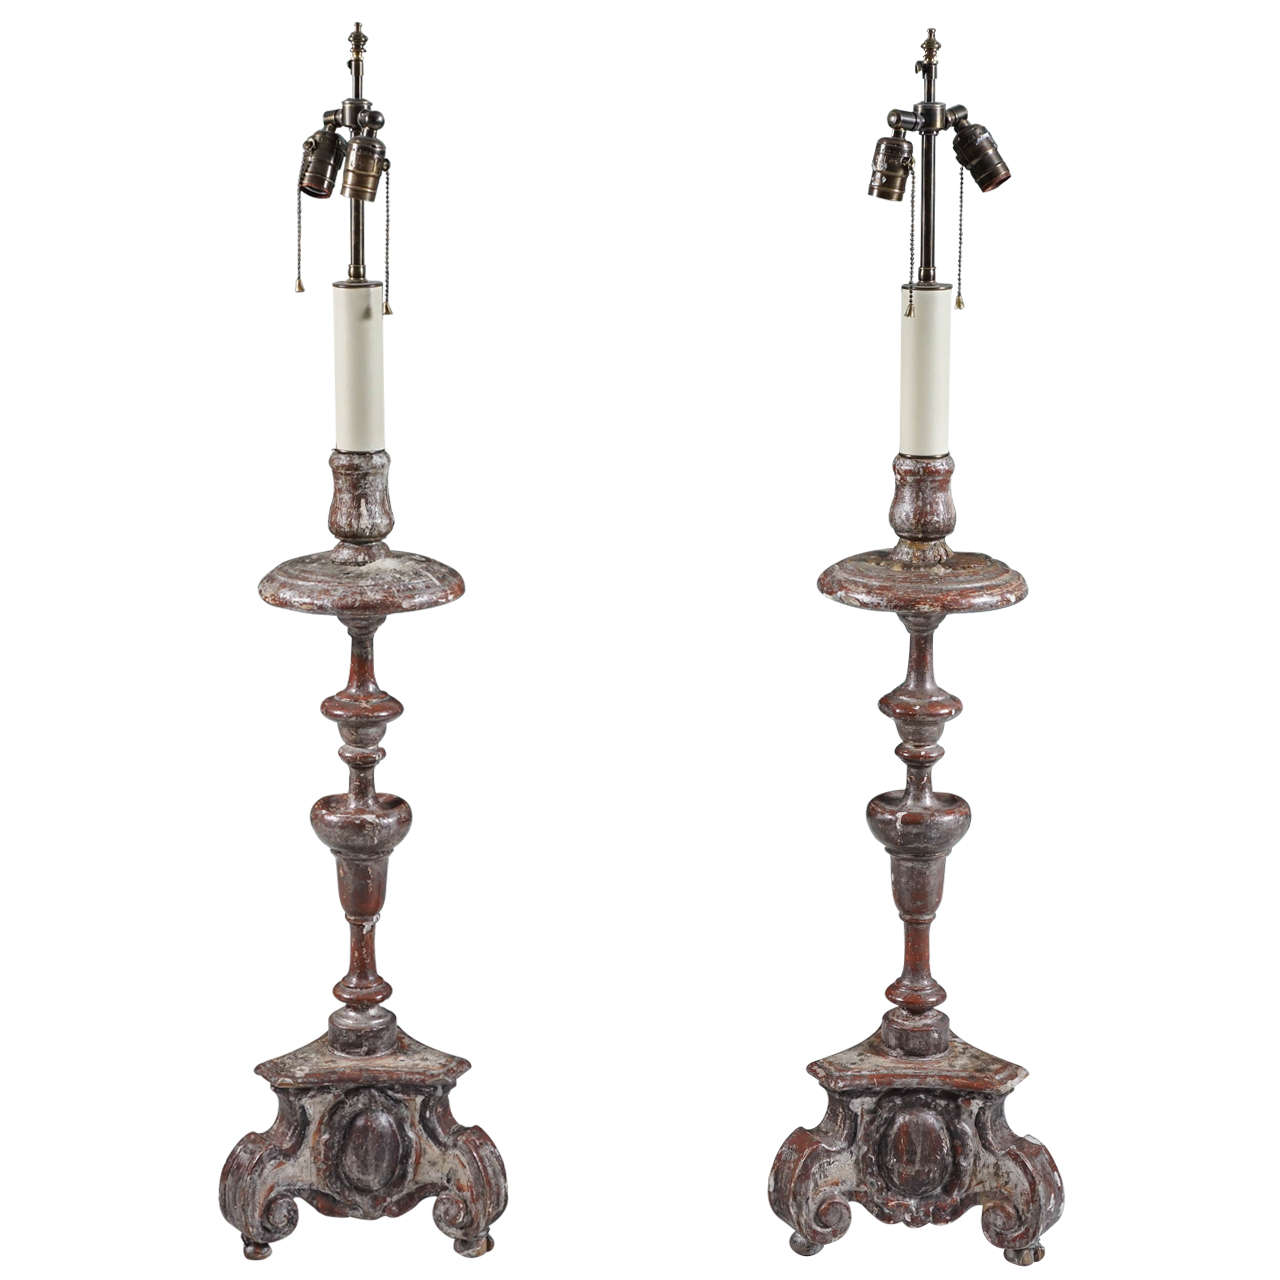 Pair of Silver Gilt Baroque Carved Wood Candlestick Lamps